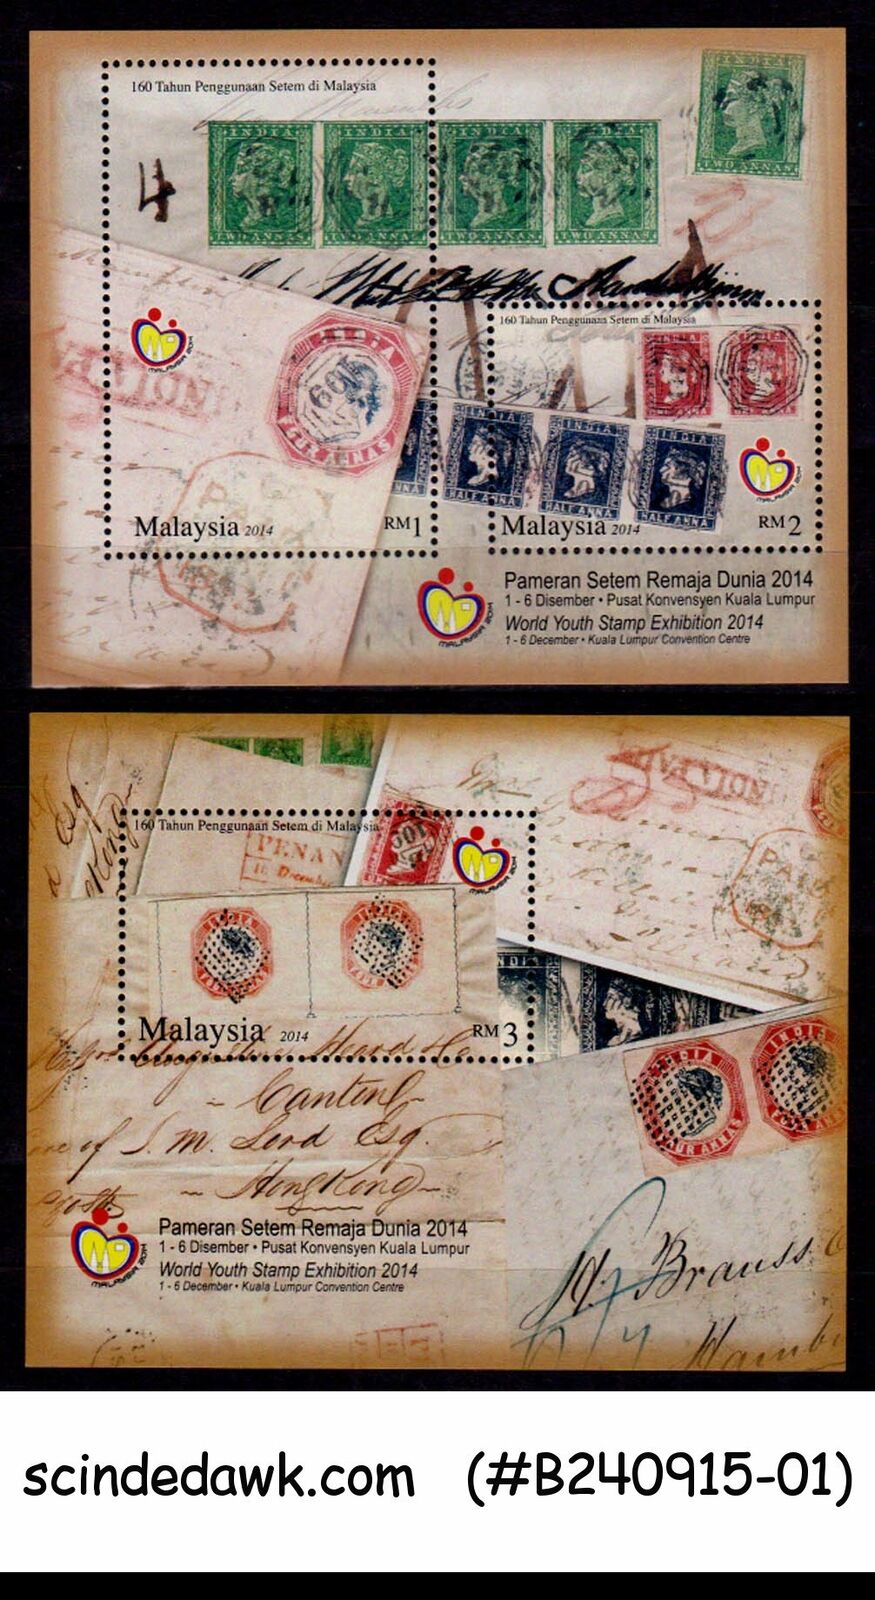 Malaysia - 2014 World Youth Stamp Exhibtion - Min. Sheet Mnh 2nos